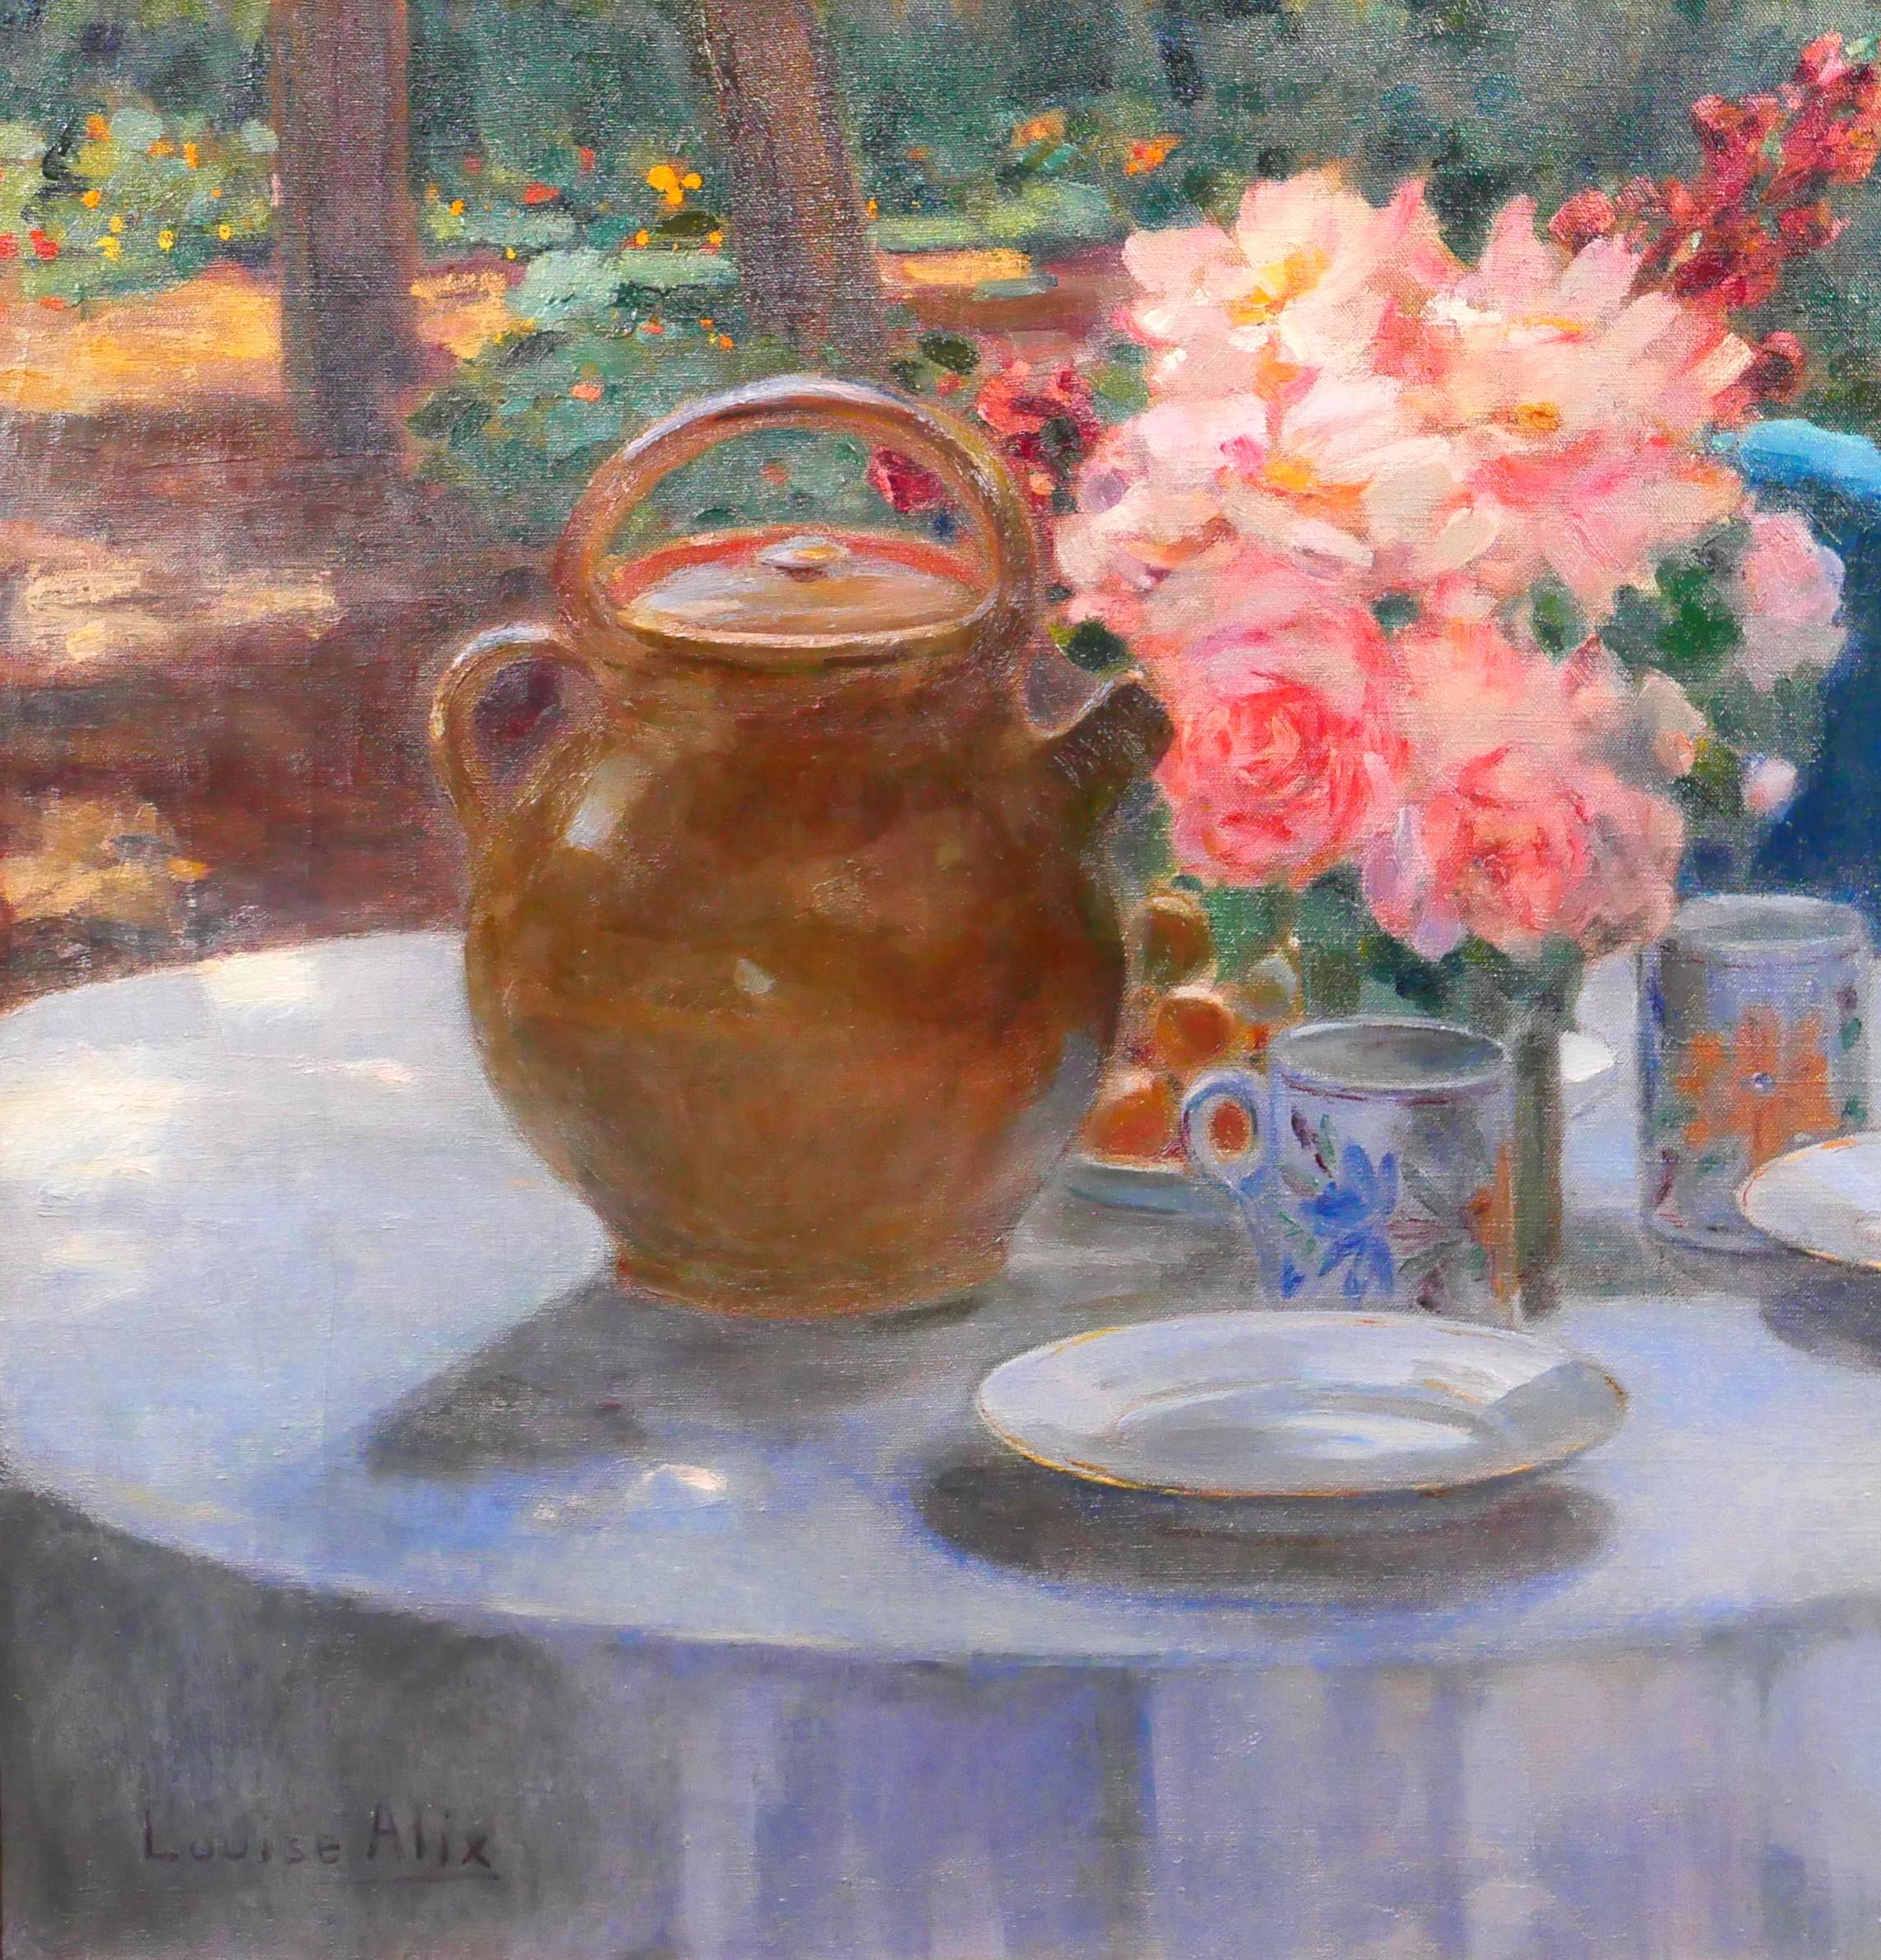 The table in the garden, flowers at tea time - Art Deco Painting by Louise Alix